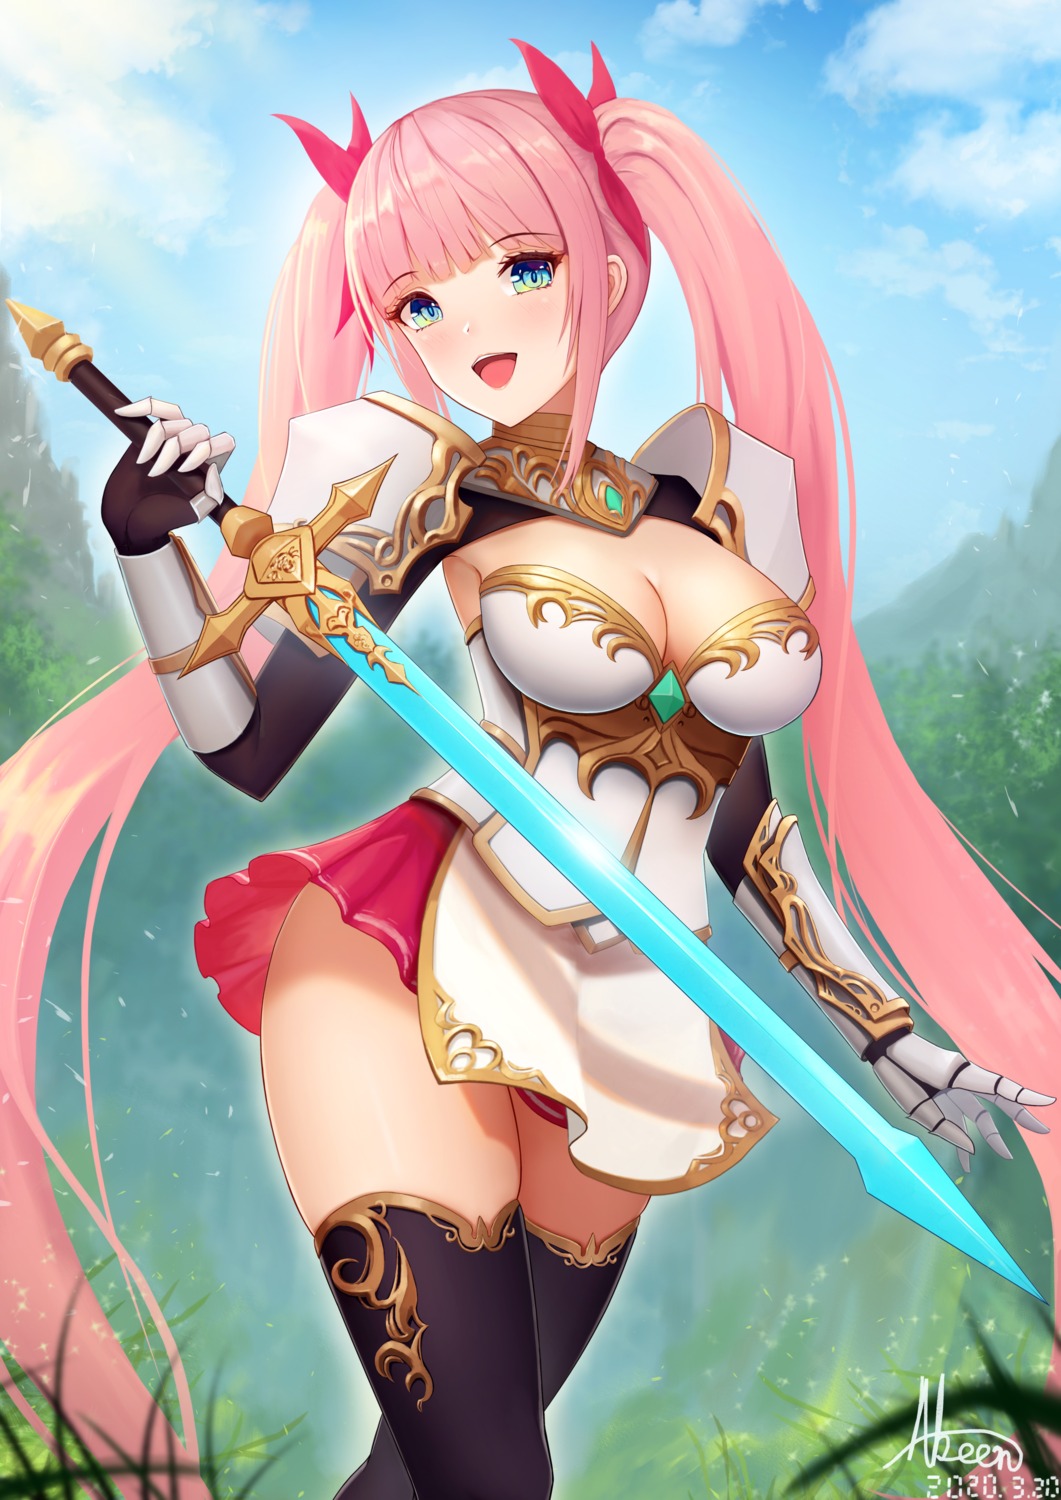 abeen_jhong armor cleavage sword thighhighs